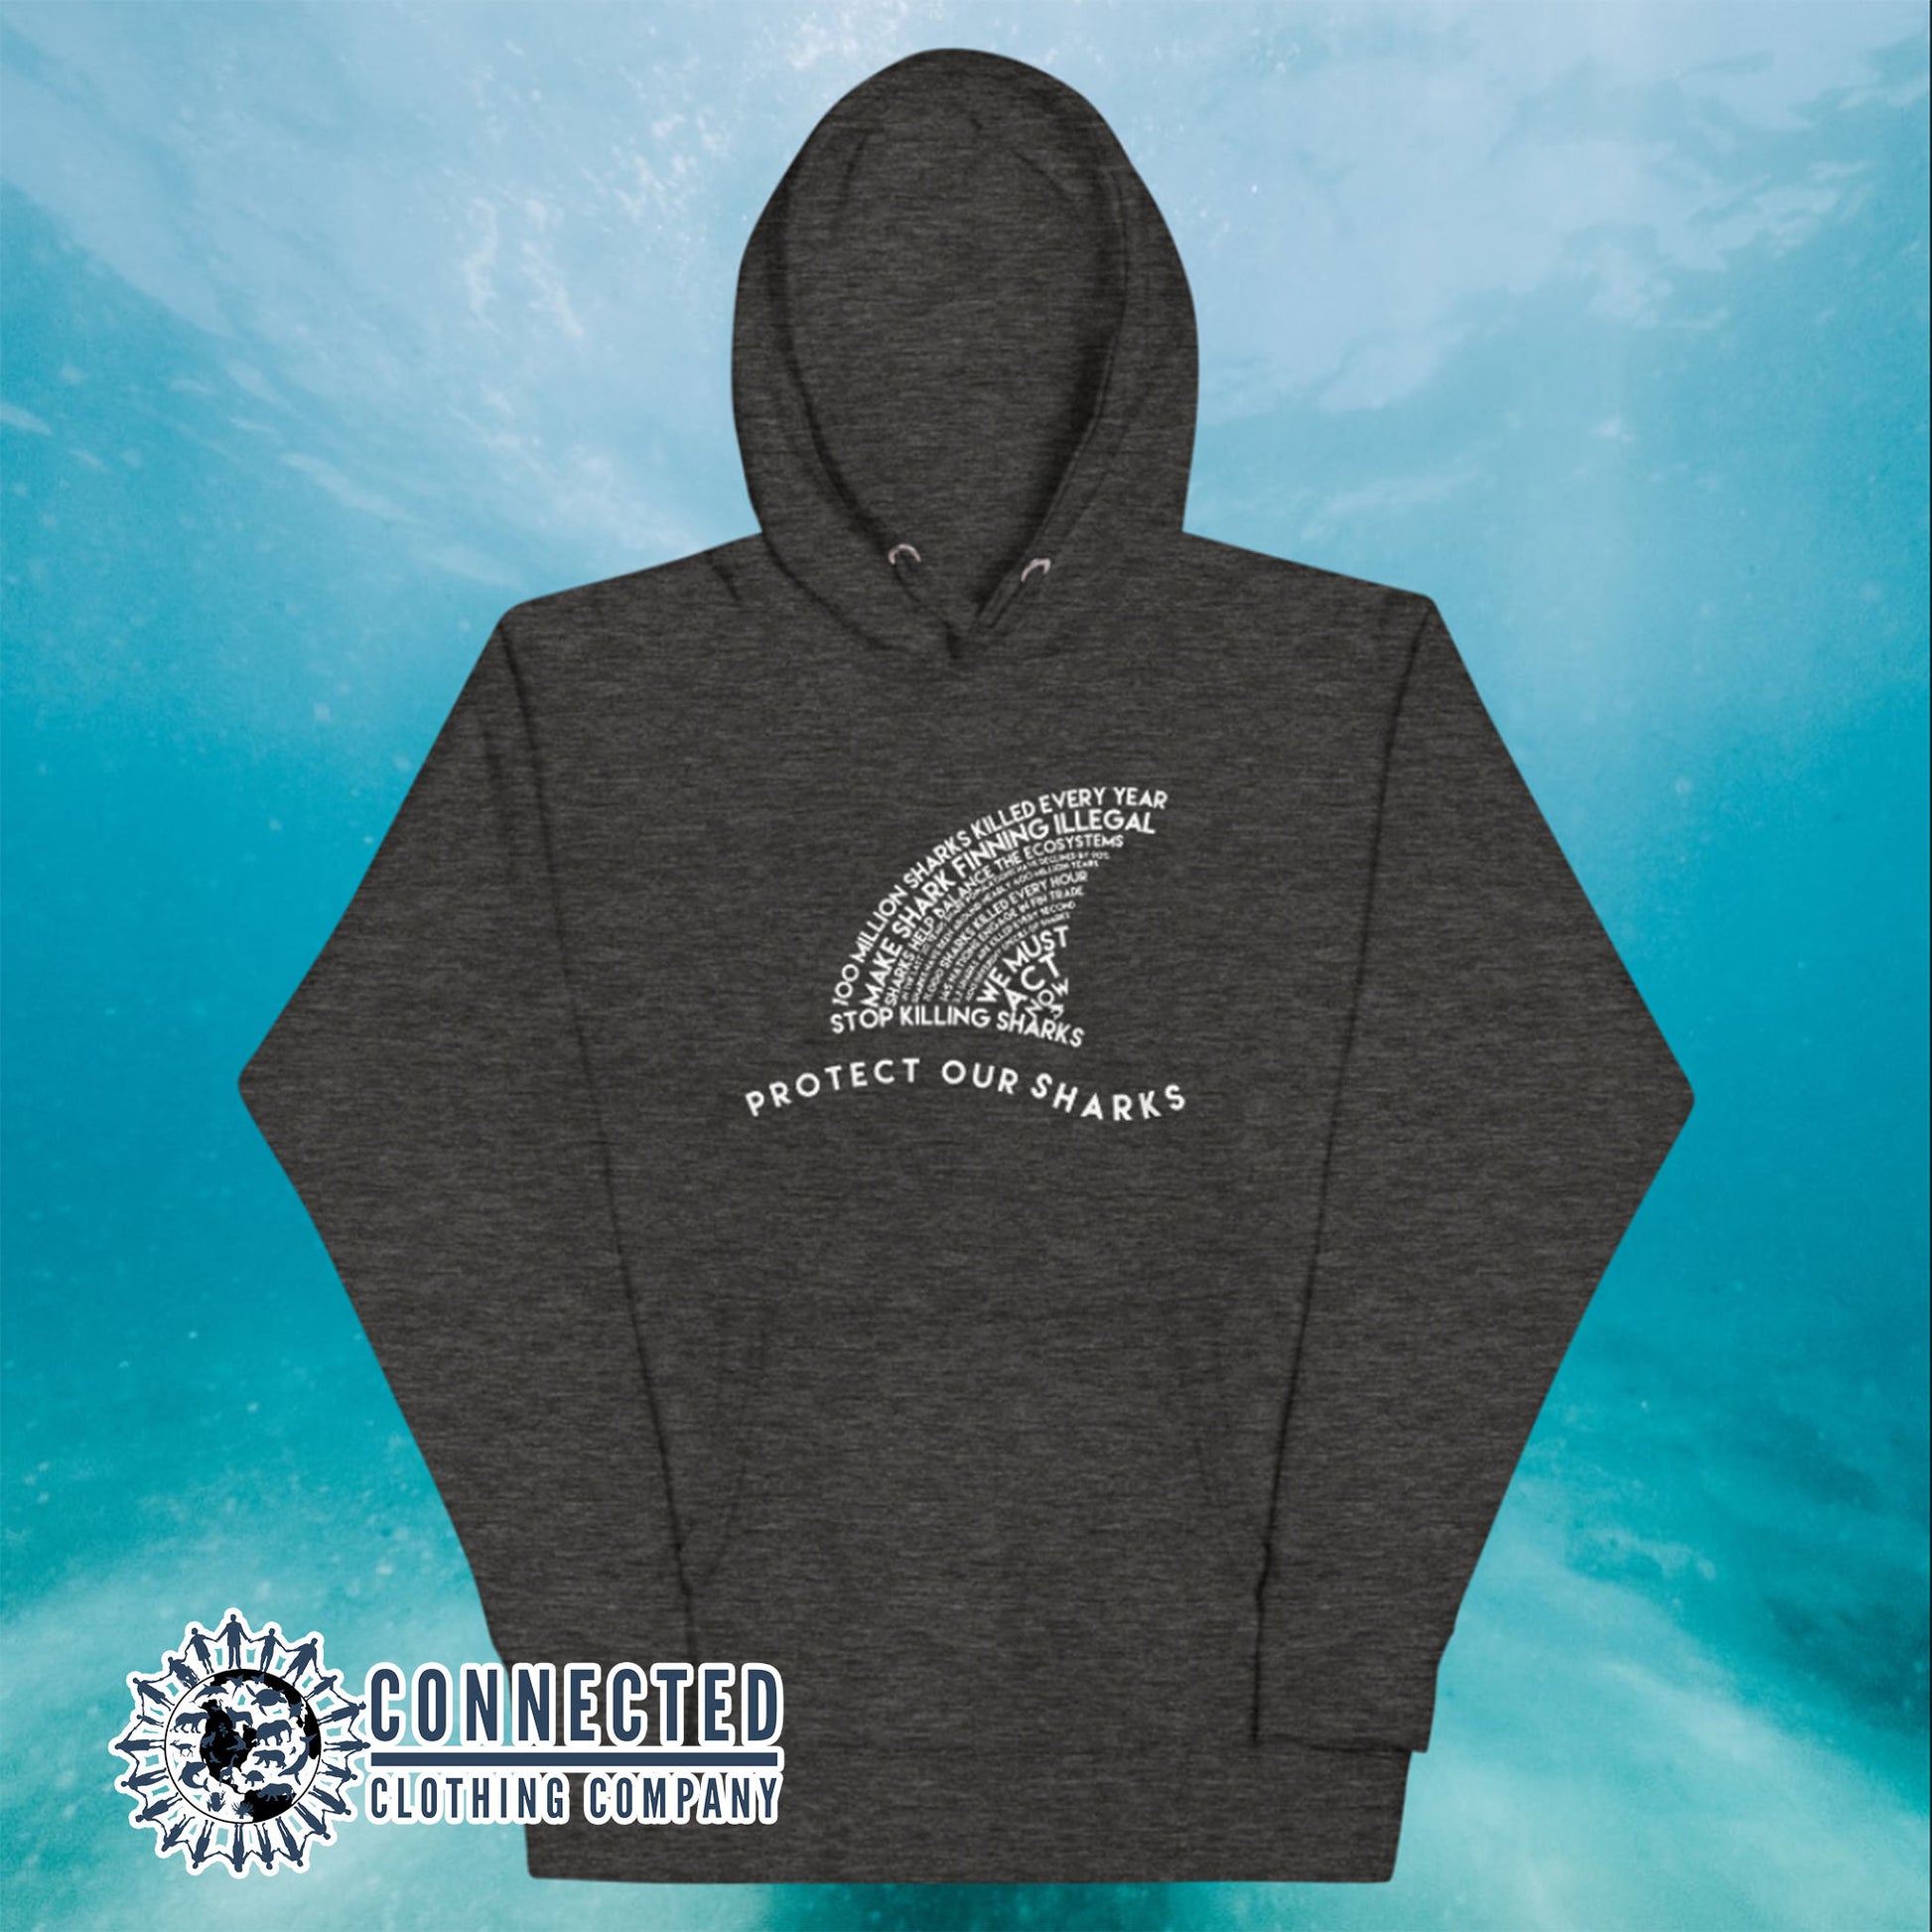 Charcoal Heather Protect Our Sharks Unisex Hoodie - Connected Clothing Company - Ethically and Sustainably Made - 10% donated to Oceana shark conservation